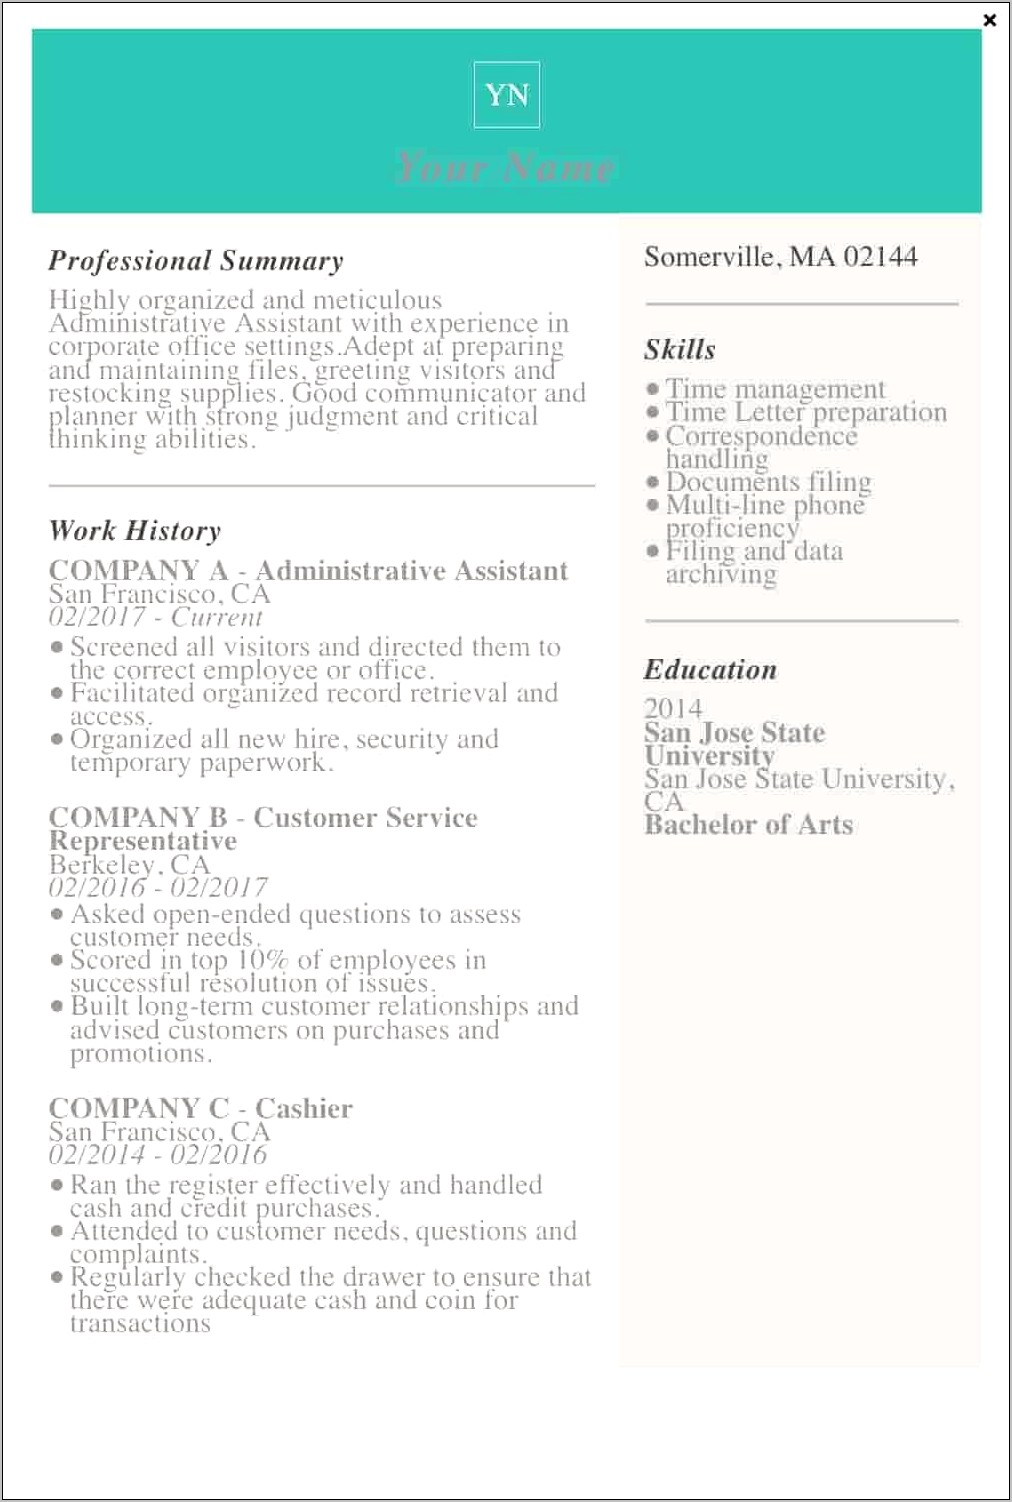 Best Administrative Assistant Resume 2014